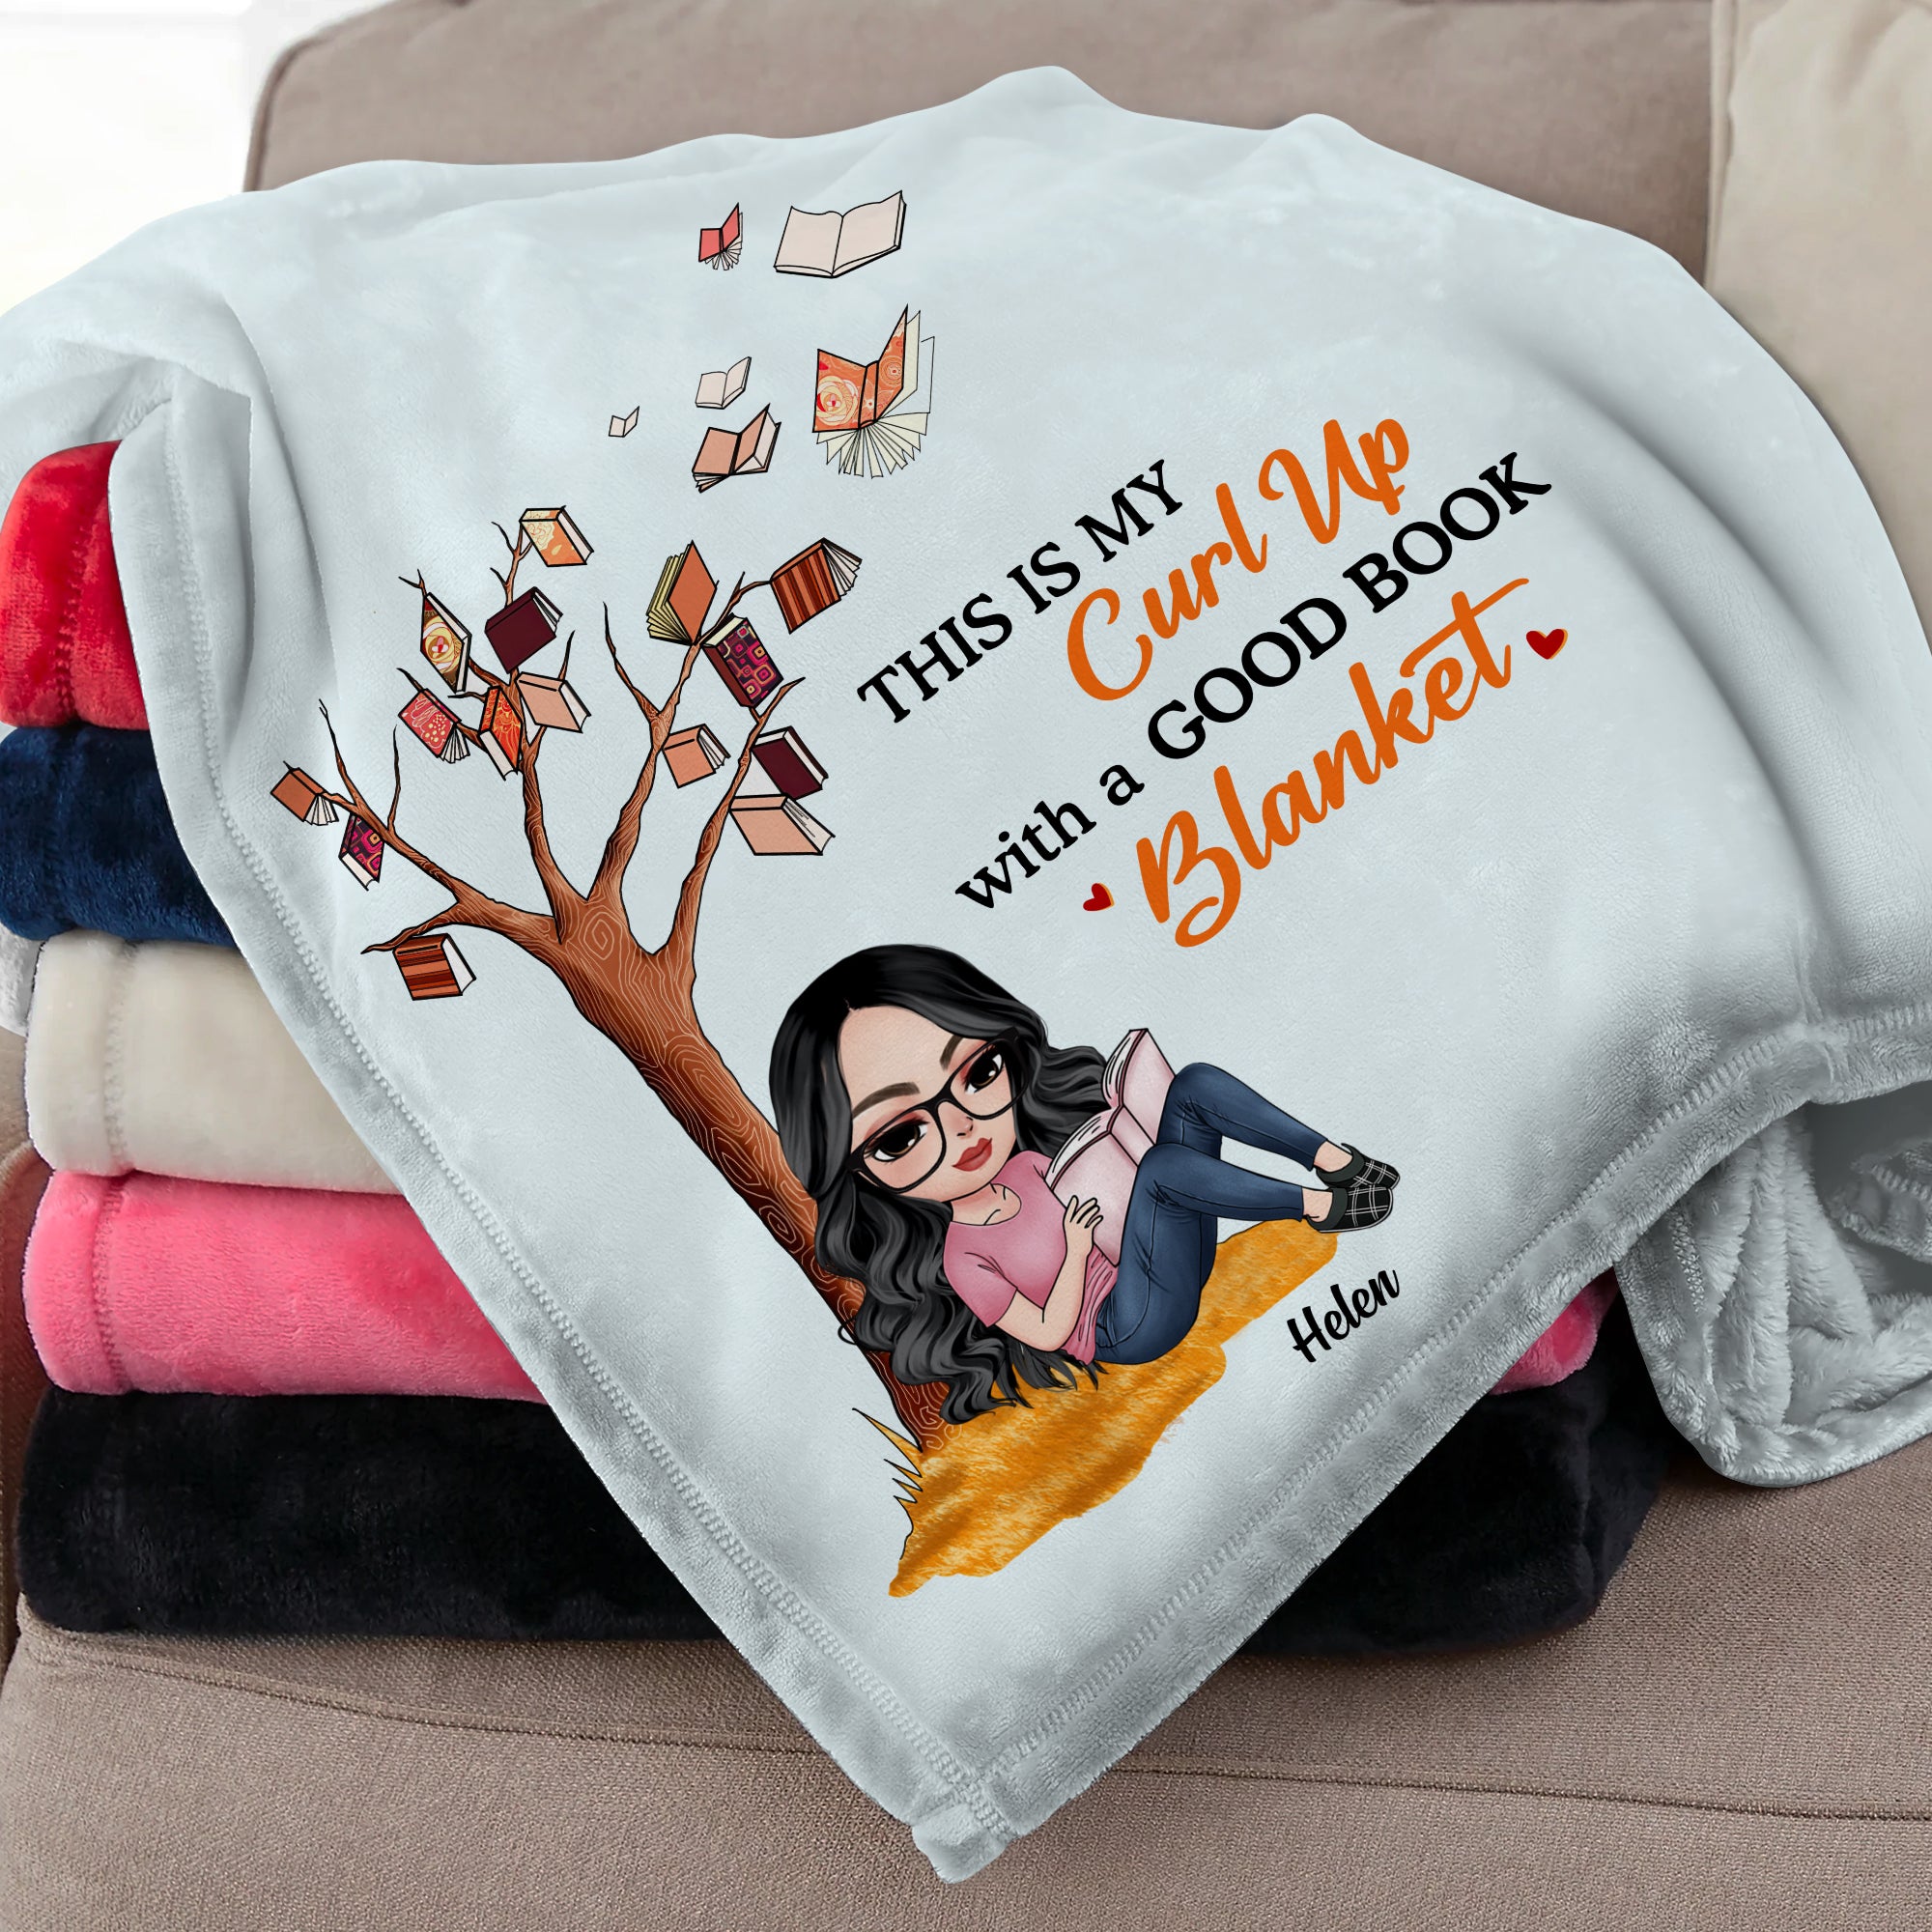 This Is My Curl Up With A Good Book Blanket, Girl Reading Book Blanket Gift - Blanket - GoDuckee